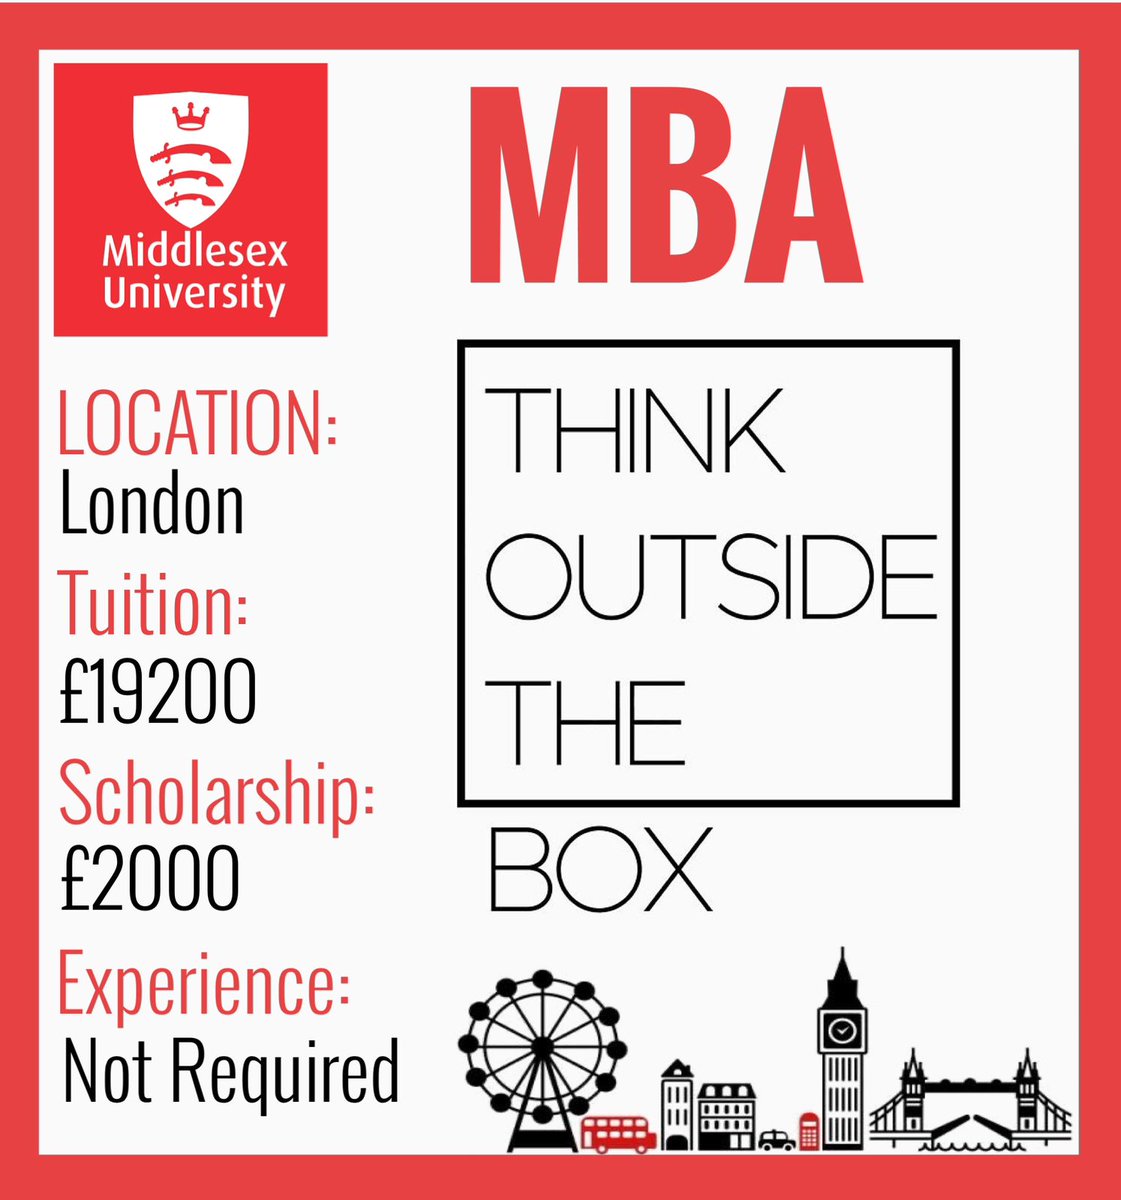 🌟 Study MBA in London - Middlesex University! 🌟

For more information contact our Study Abroad Consultants in Colombo
Book a consultation: kcoverseas.lk/appointments/

#StudyAbroad #HigherEducation #studyinUK #StudyAbroadConsultants #OverseasEducation